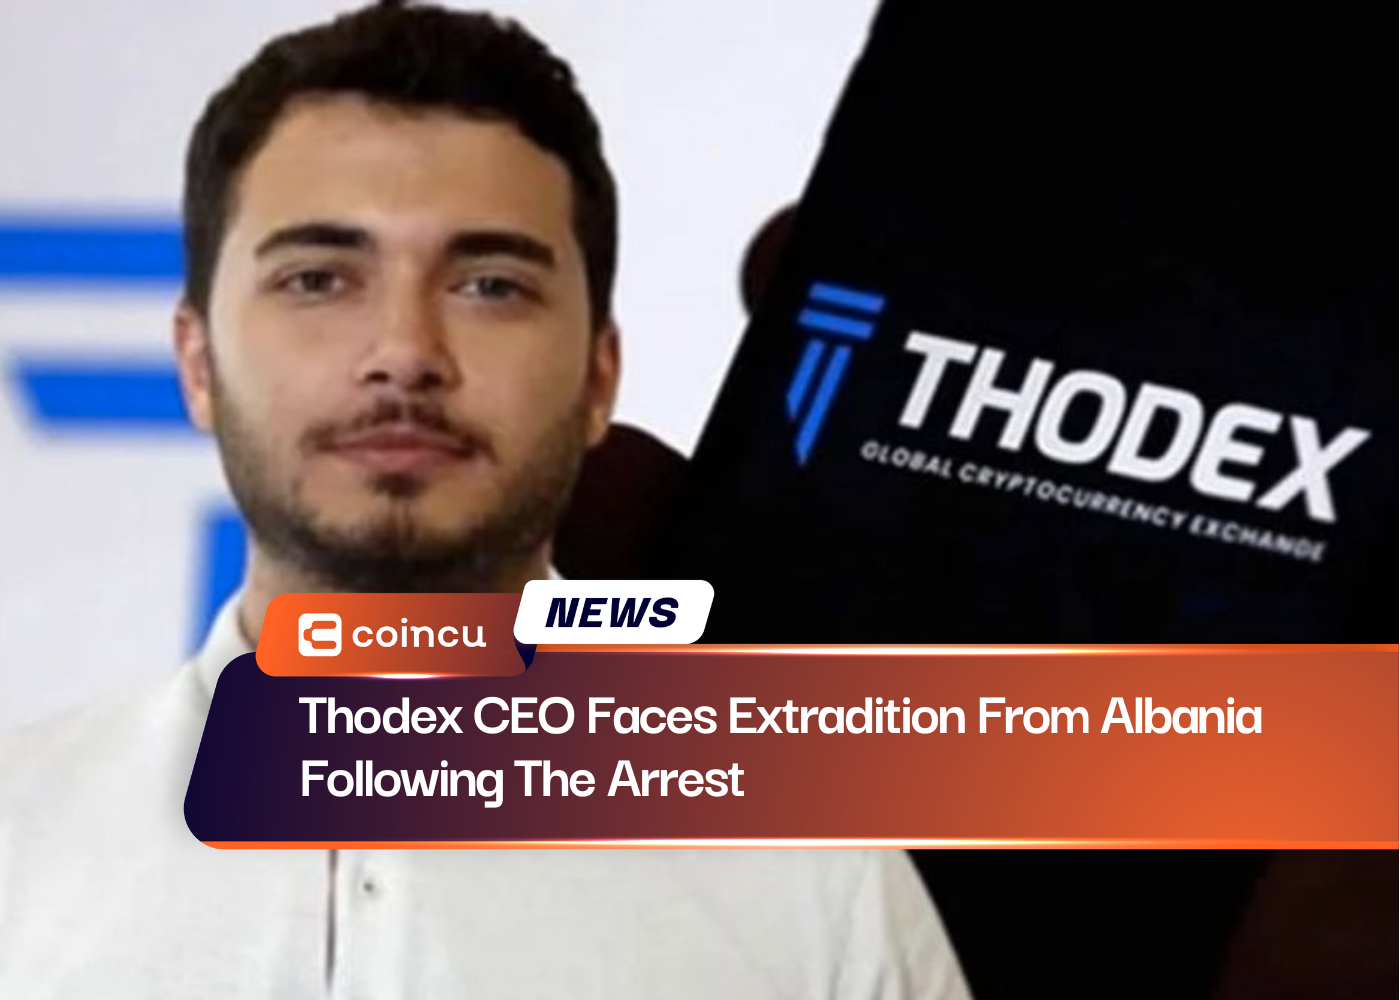 Thodex CEO Faces Extradition From Albania Following The Arrest